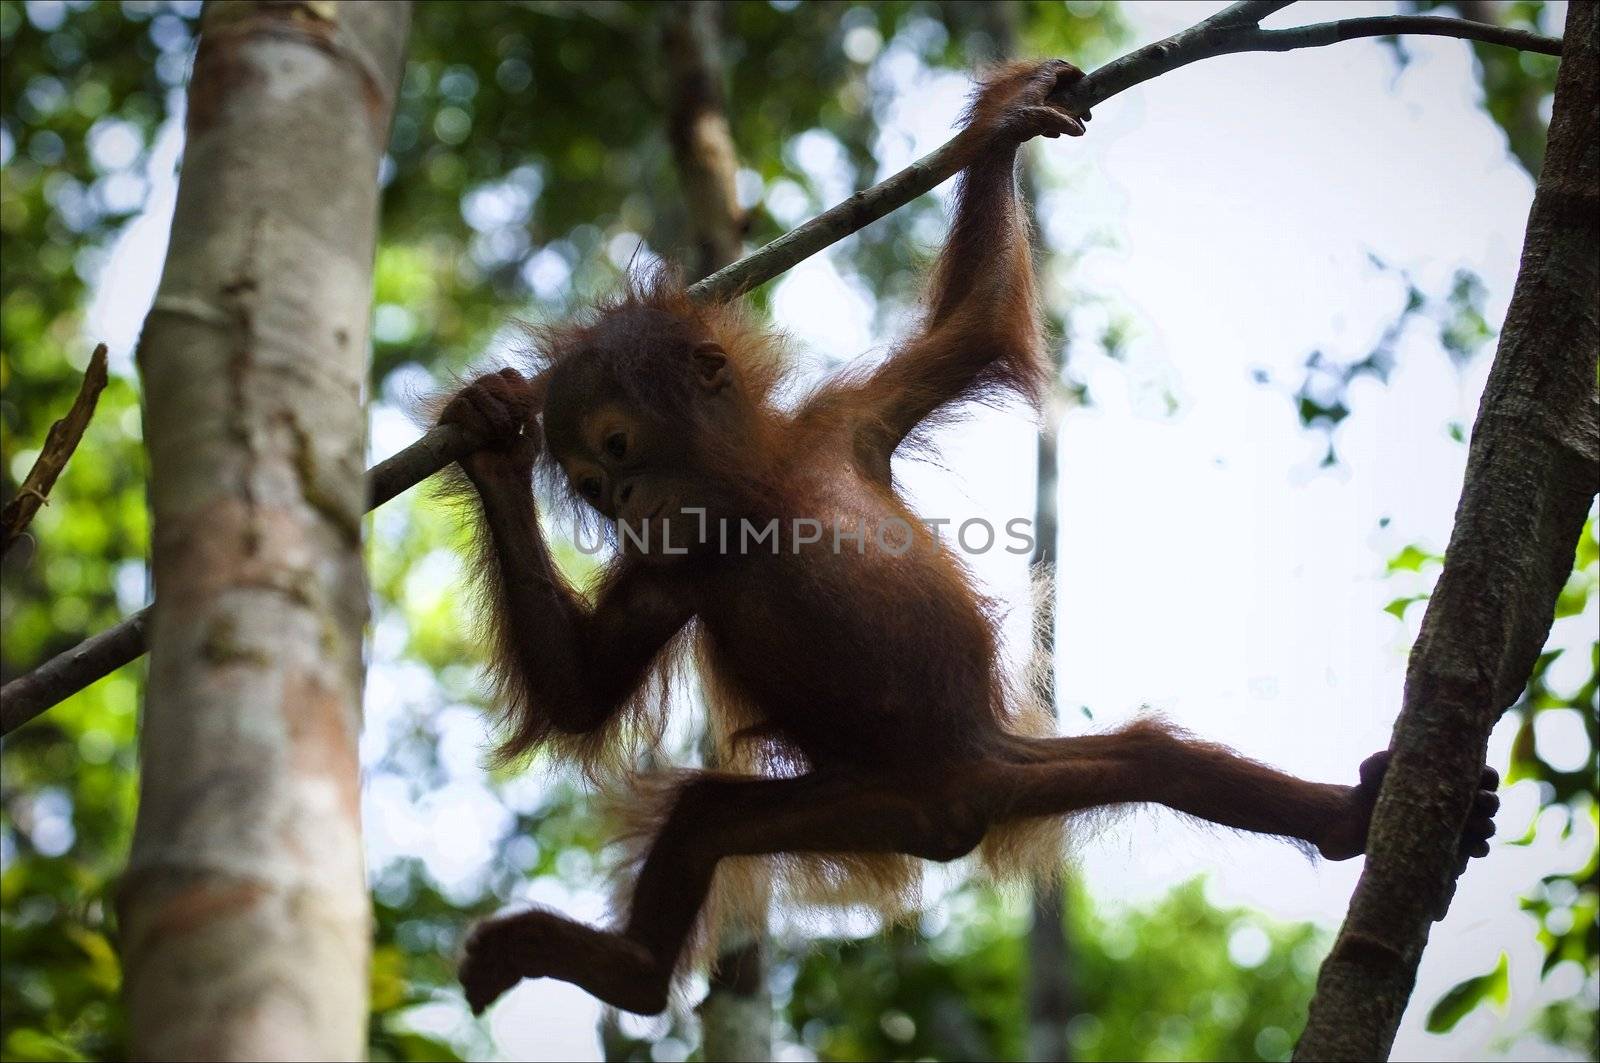 Cub of the orangutan on a branch. The small cub of the orangutan climbs on trees opposite to light.